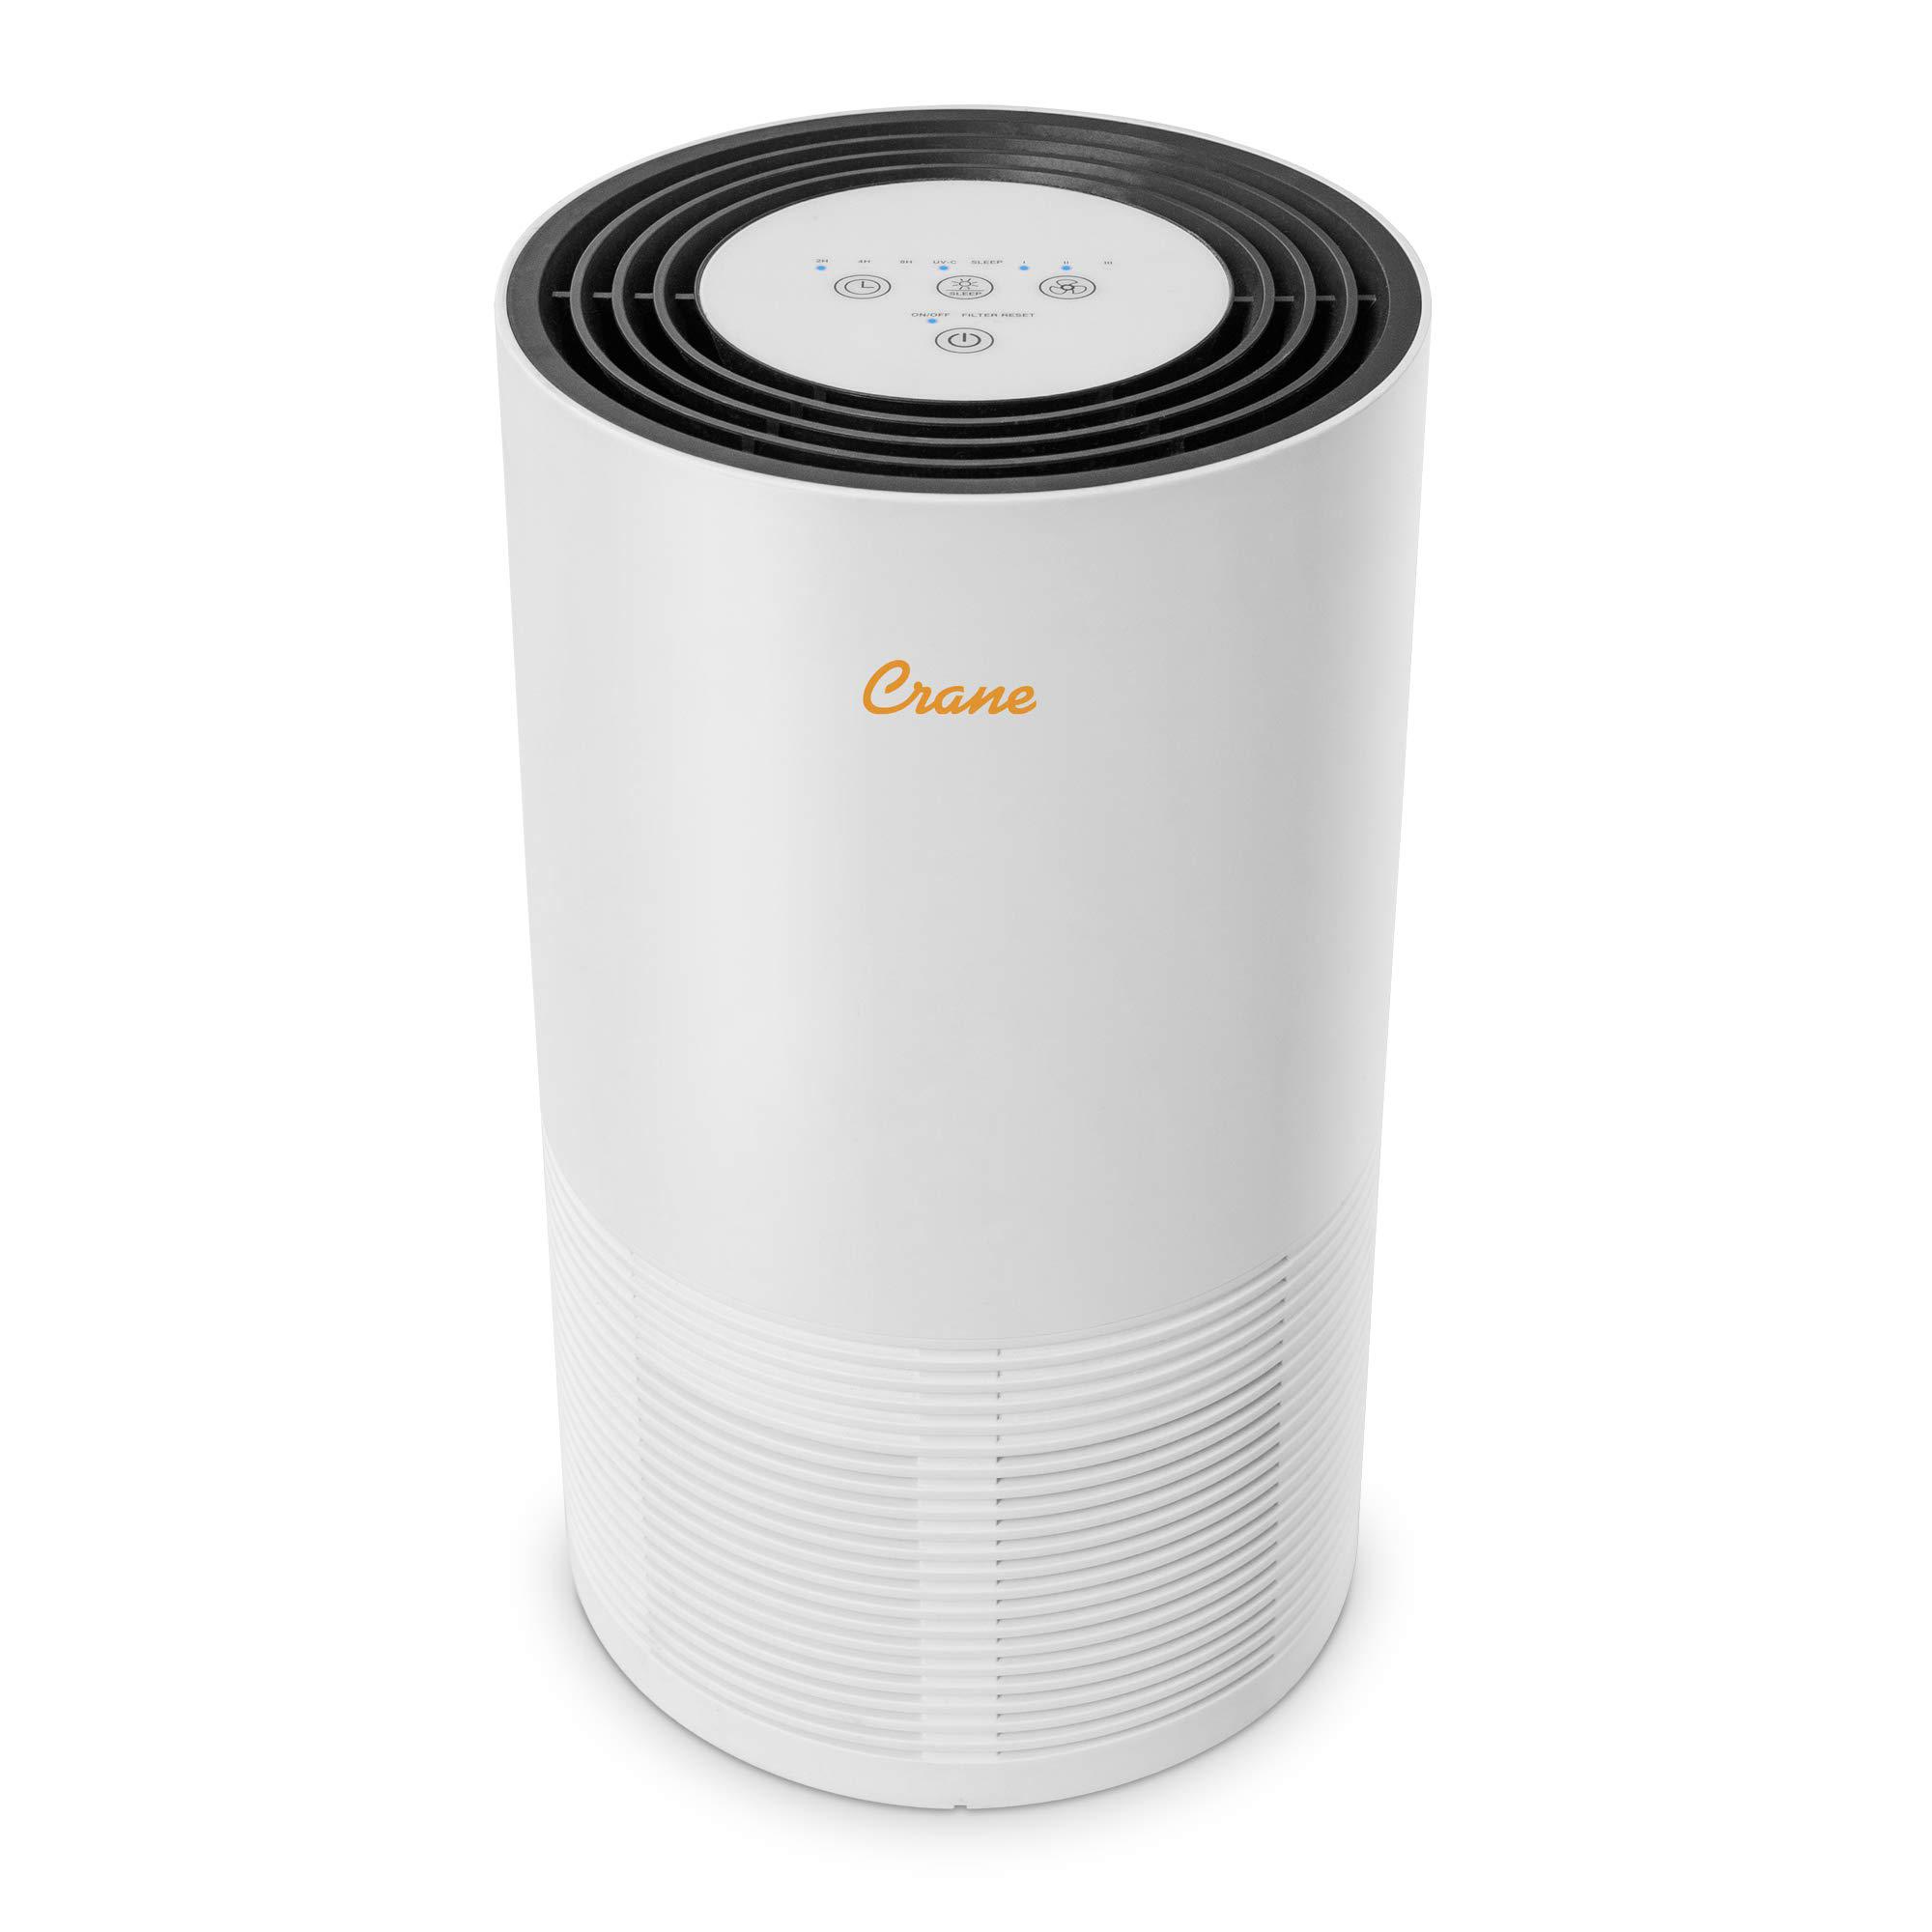 Crane USA Crane Air Purifier with True HEPA Filter, Germicidal UV Light, 300 Sq Feet Coverage, Timer Function, Sleep Mode, Washable Partic